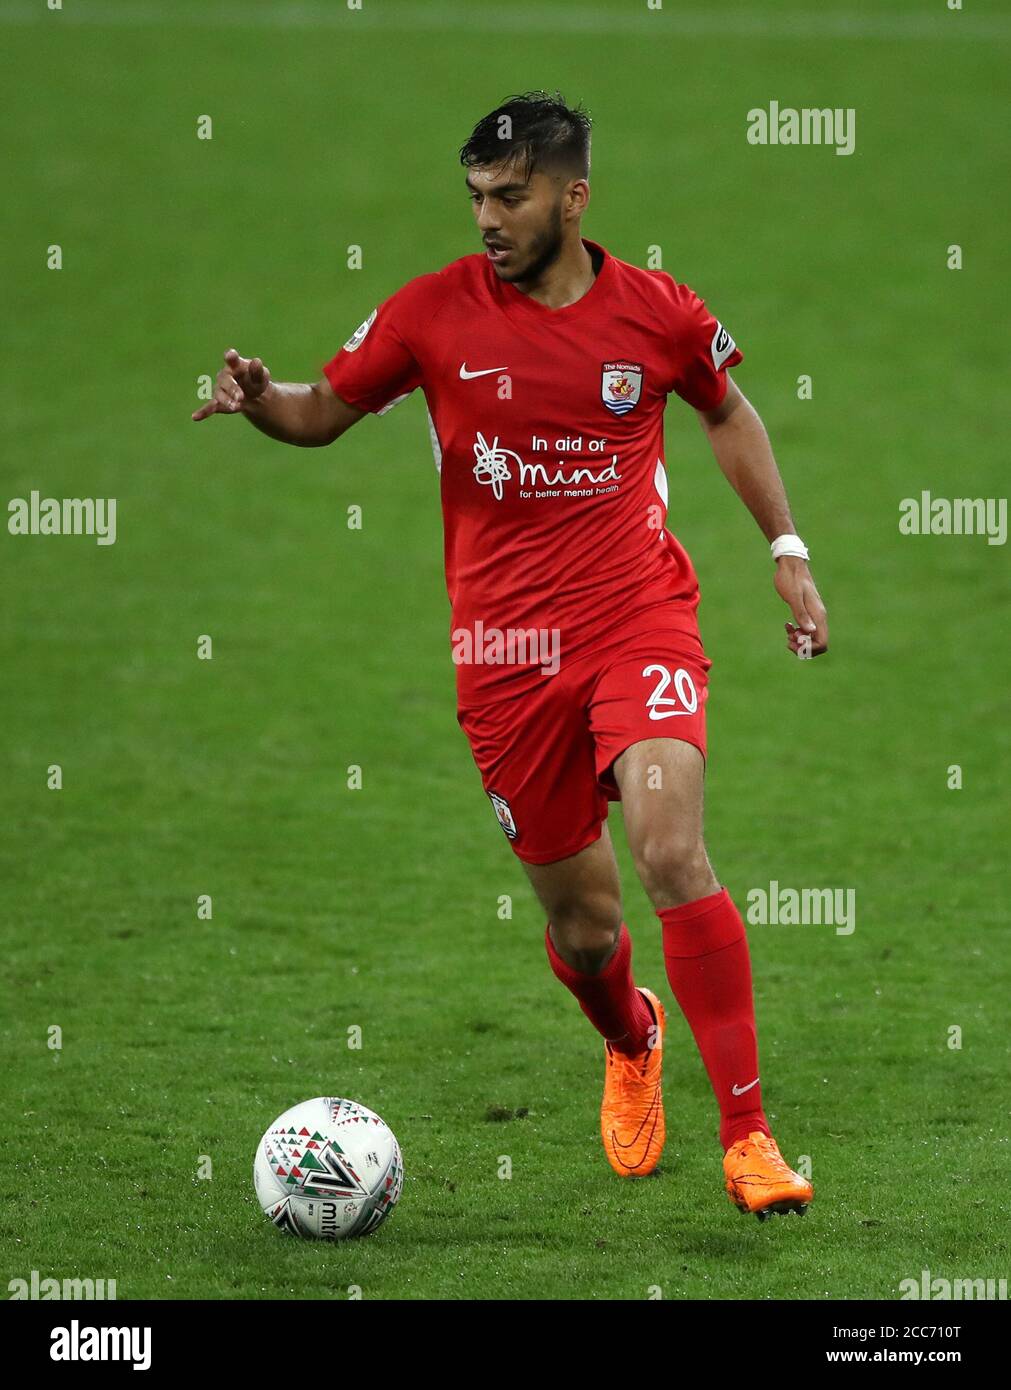 Connah's Quay Nomads' Sameron Singh-Dool during the UEFA Champions League qualifying first round match at The Cardiff City Stadium, Cardiff. Stock Photo